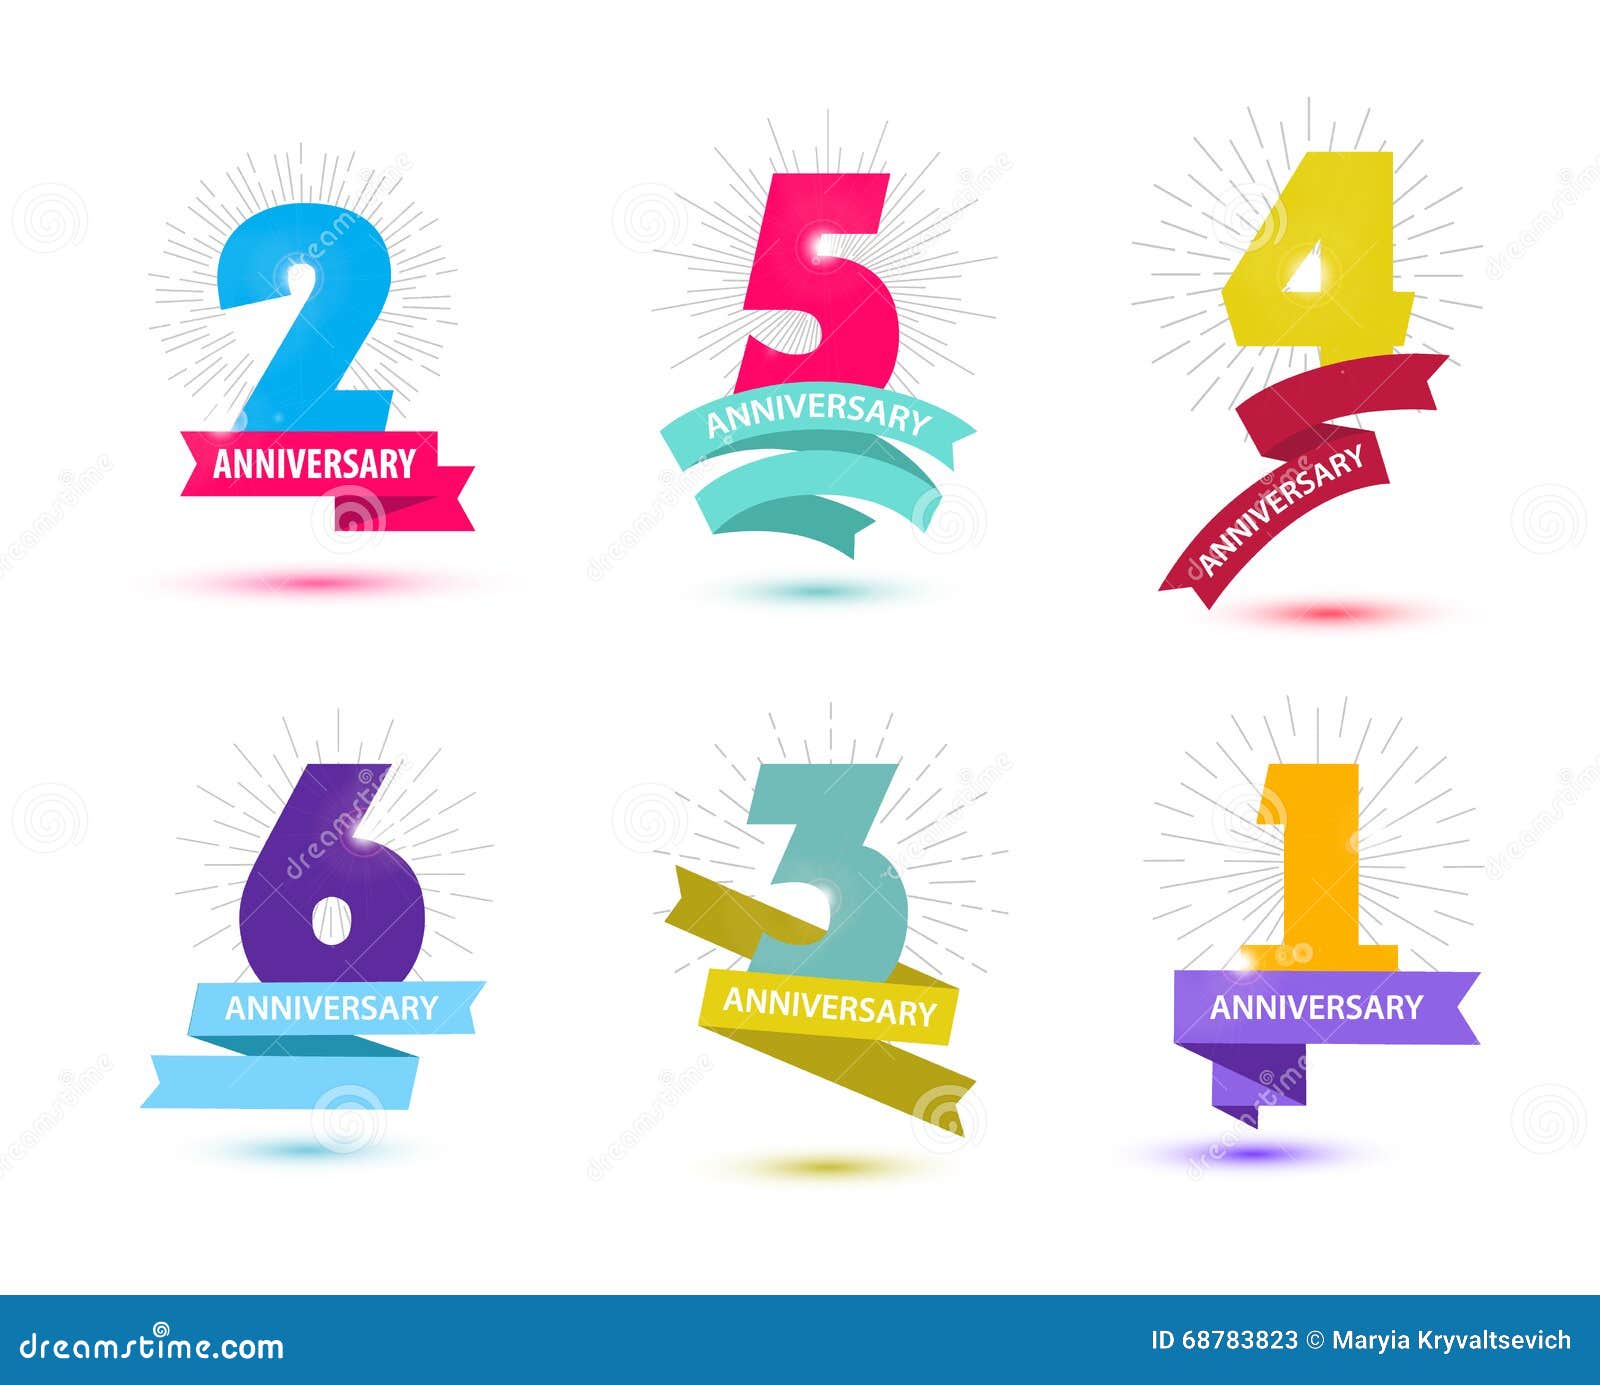 Vector Set Of Anniversary Numbers Design 1 2 3 4 5 6 Icons Compositions With Ribbons Stock Vector Illustration Of Banner Birthday 6873